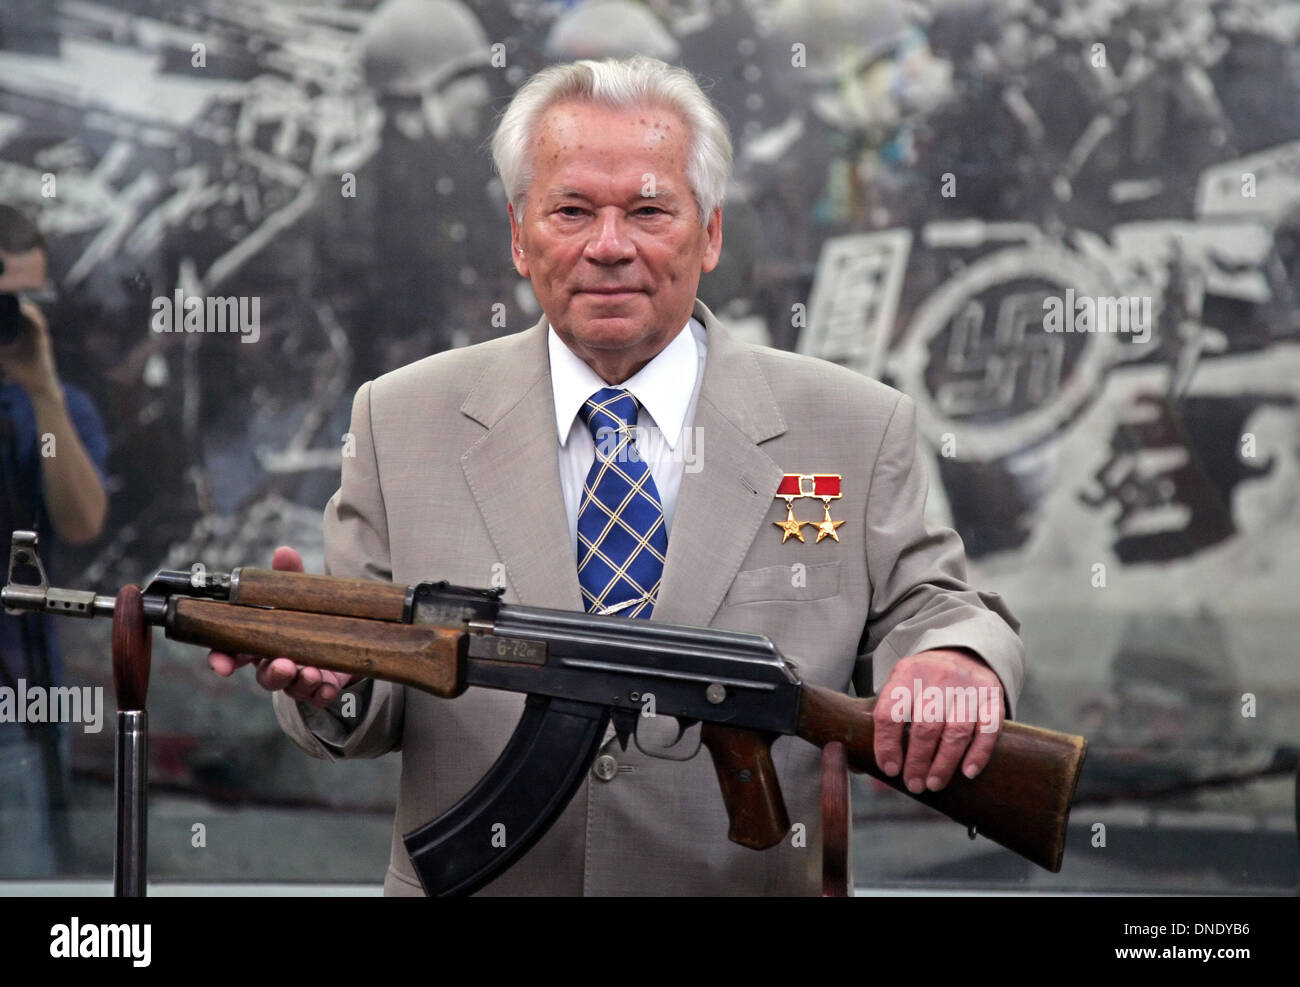 Dec. 23, 2013 - Mikhail Kalashnikov, the inventor of the AK-47 in the  Soviet Union, has died at age 94. Kalashnikov's 1947 model became one of  the most widely recognized and used